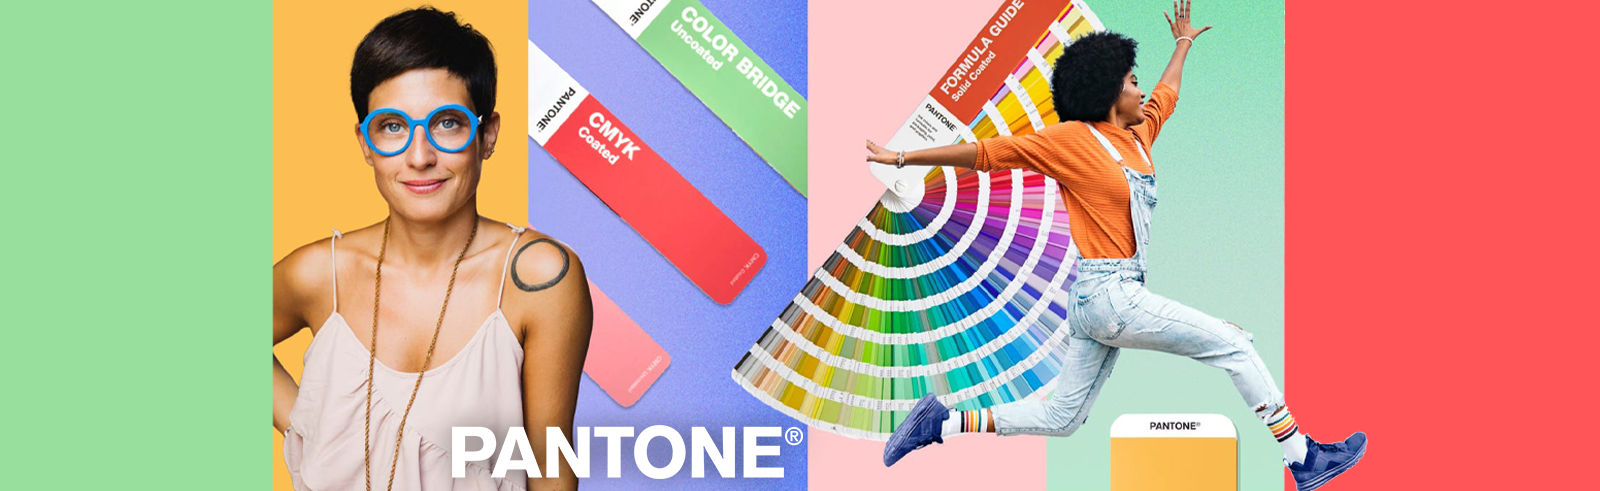 What Is a Pantone Color Guide, and What Is It For? - Design